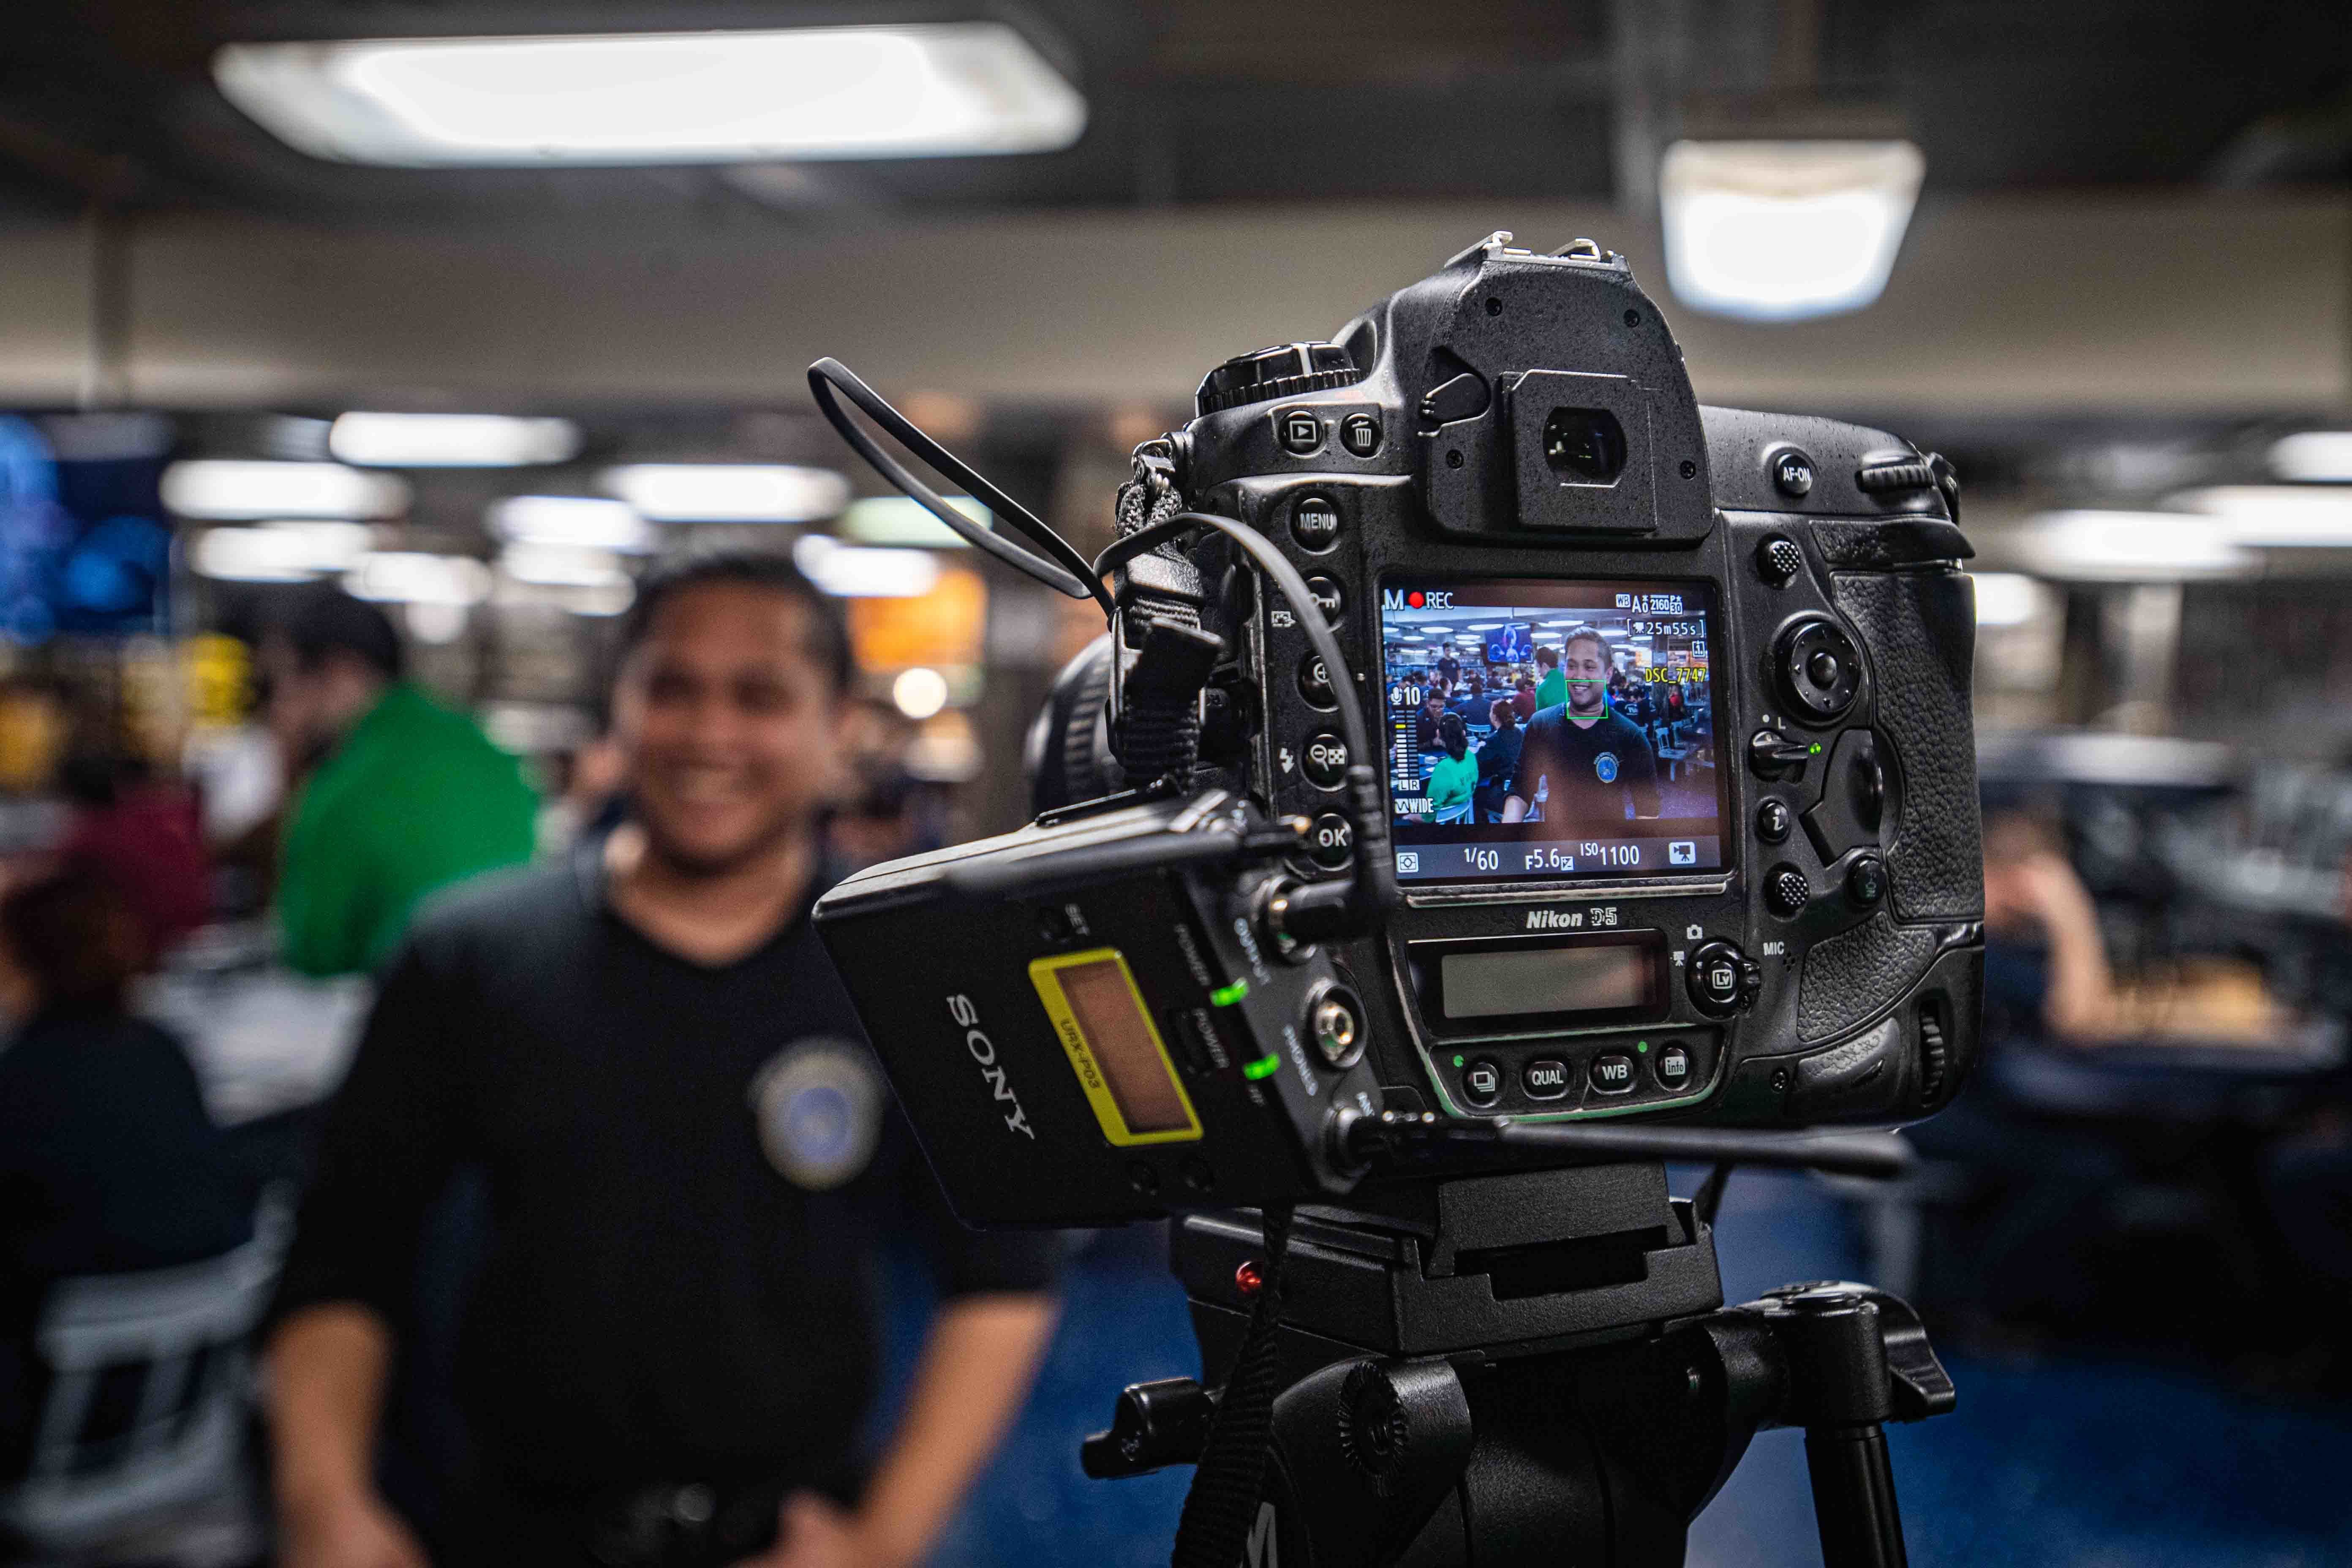 U.S. Navy Culinary Specialist Seaman Nathaniel Casa, from Dallas, participates in an on-camera interview aboard the aircraft carrier USS Nimitz (CVN 68).